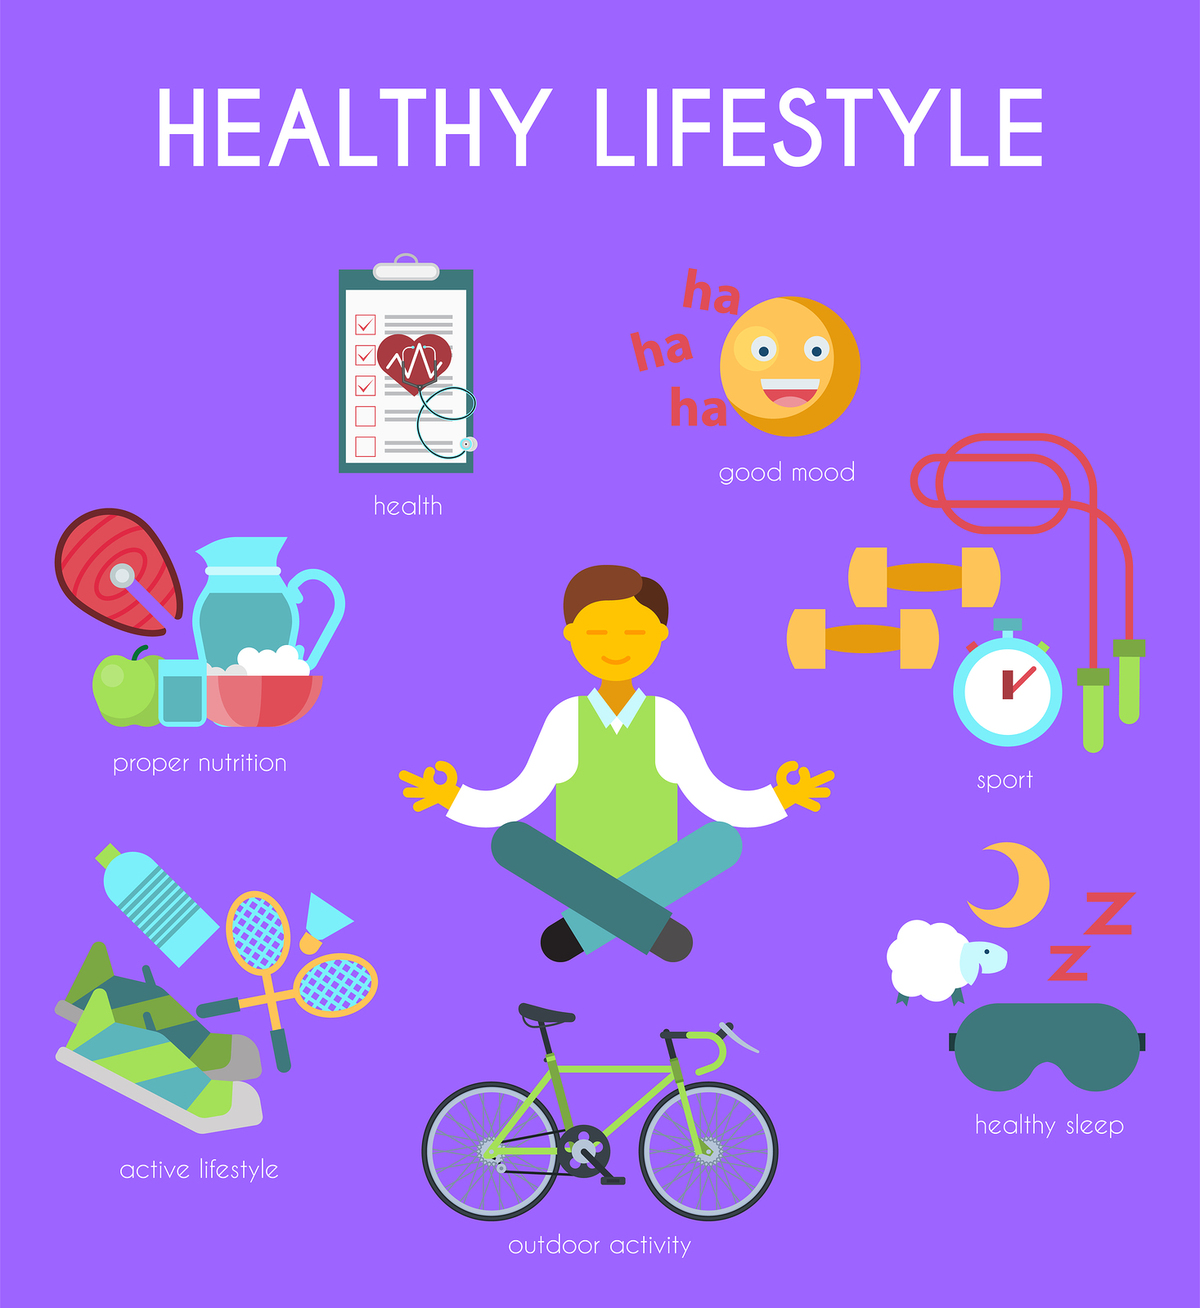 Healthy lifestyle including proper nutrition, active lifestyle, good mood, sport, healthy sleep and outdoor activity.